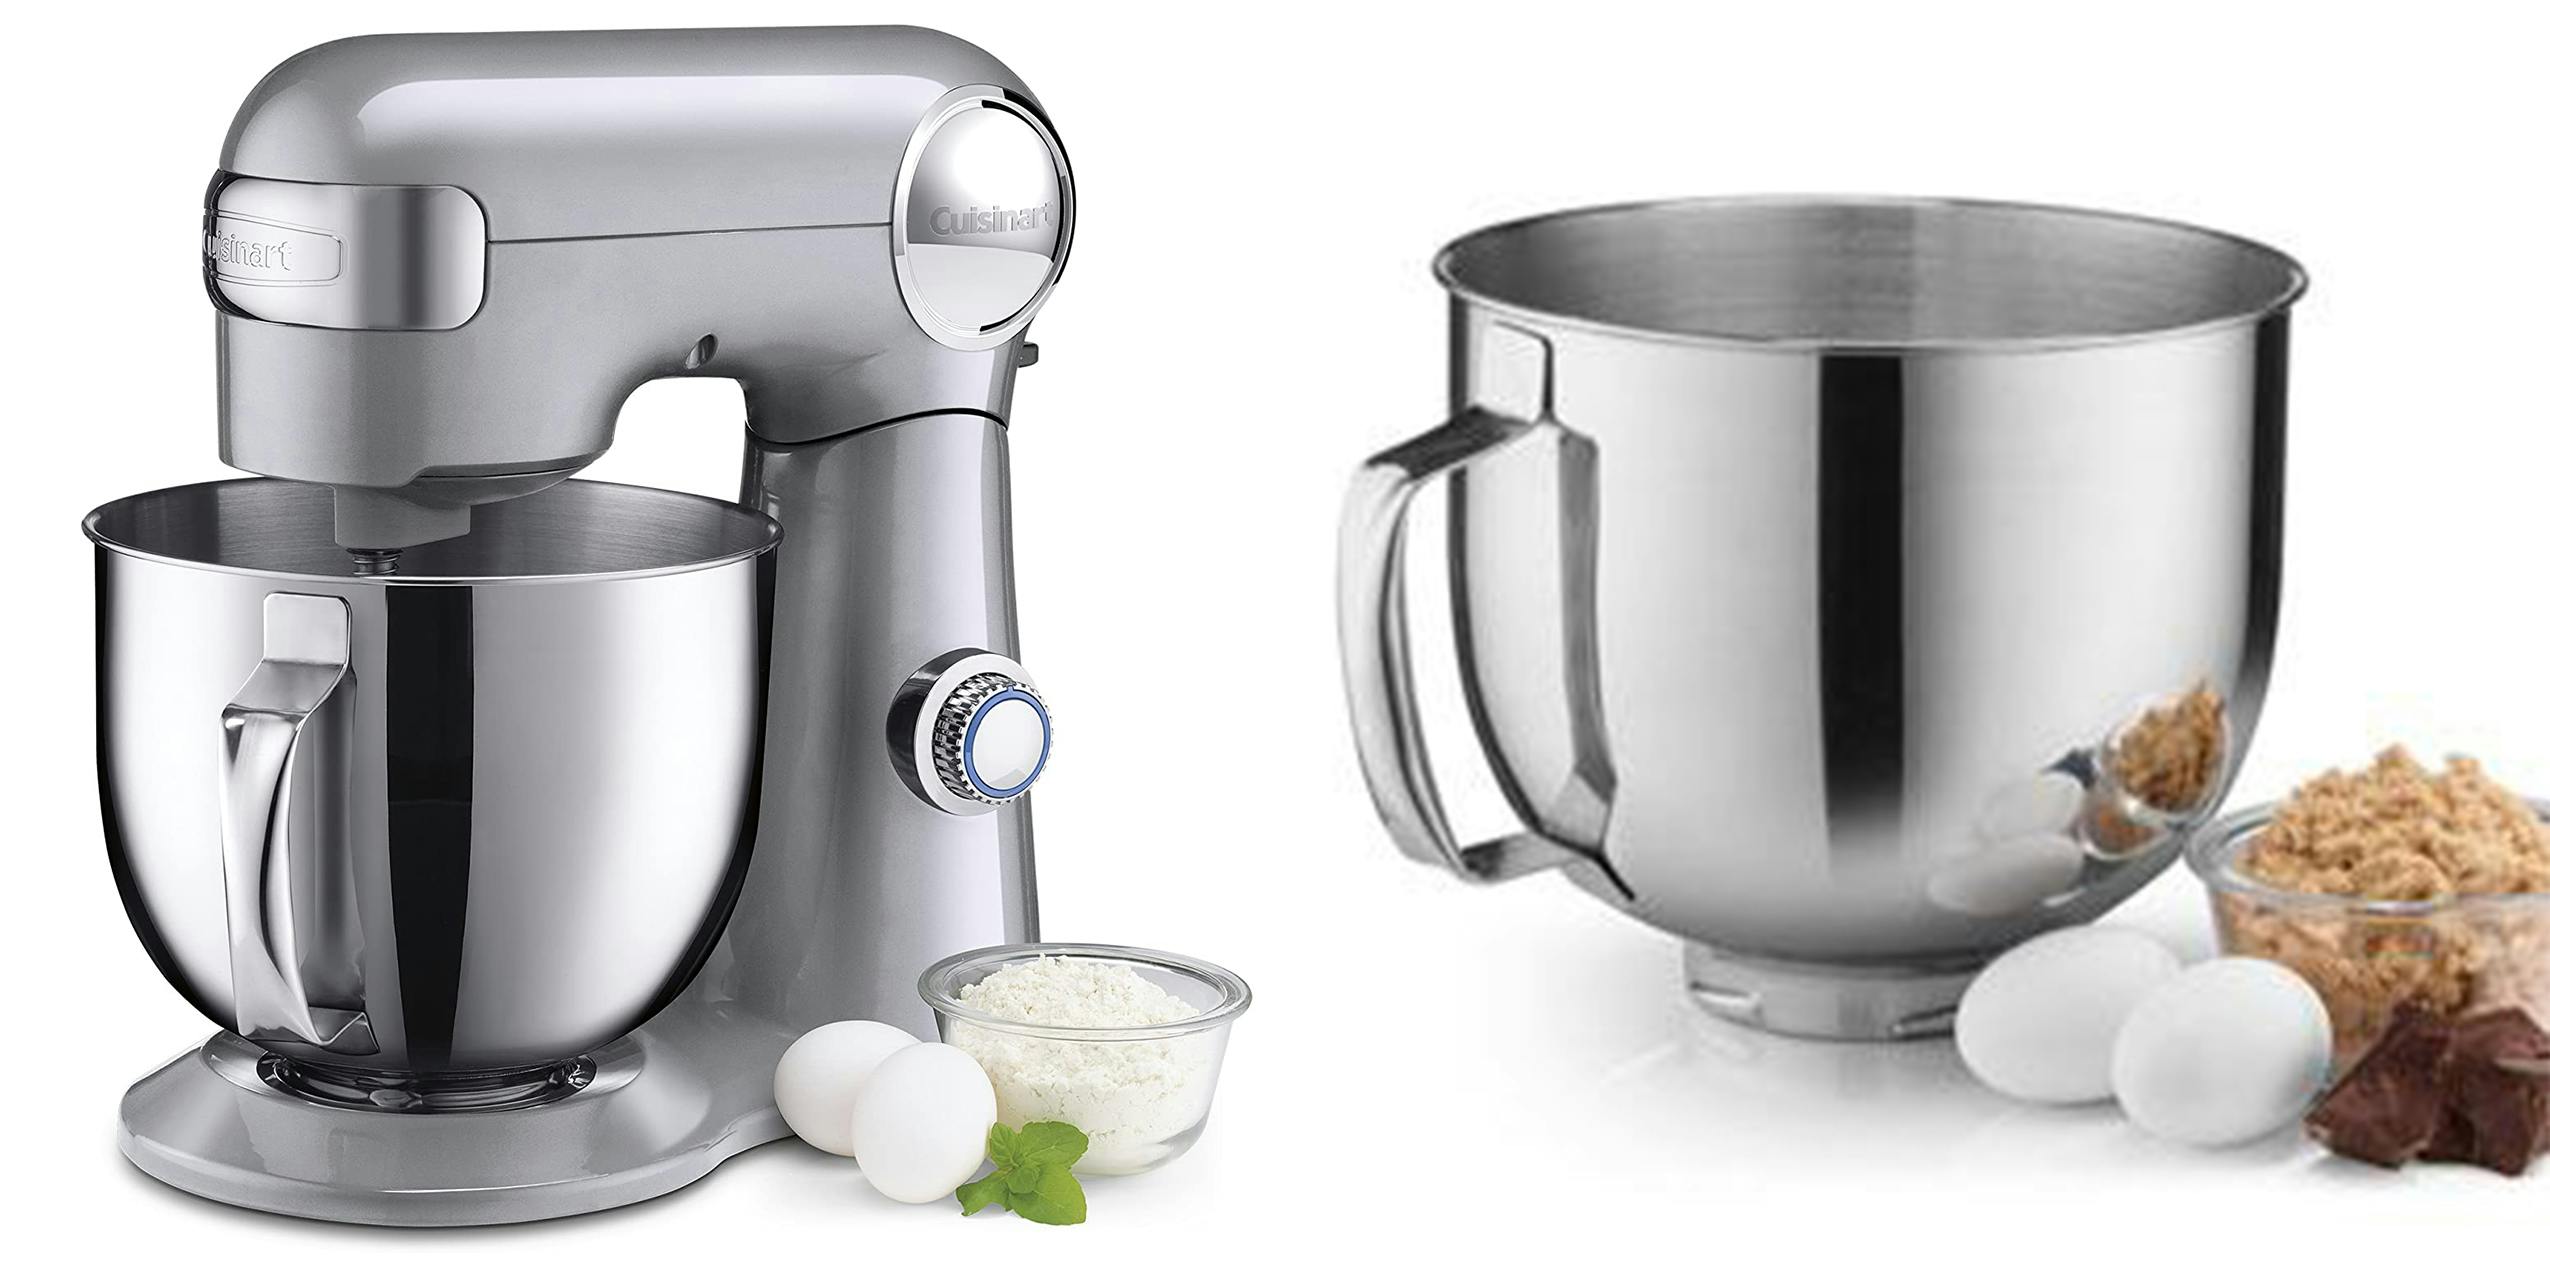 Cuisinart Stand Mixer, one of the best kitchen gadgets lifestyle pictures.